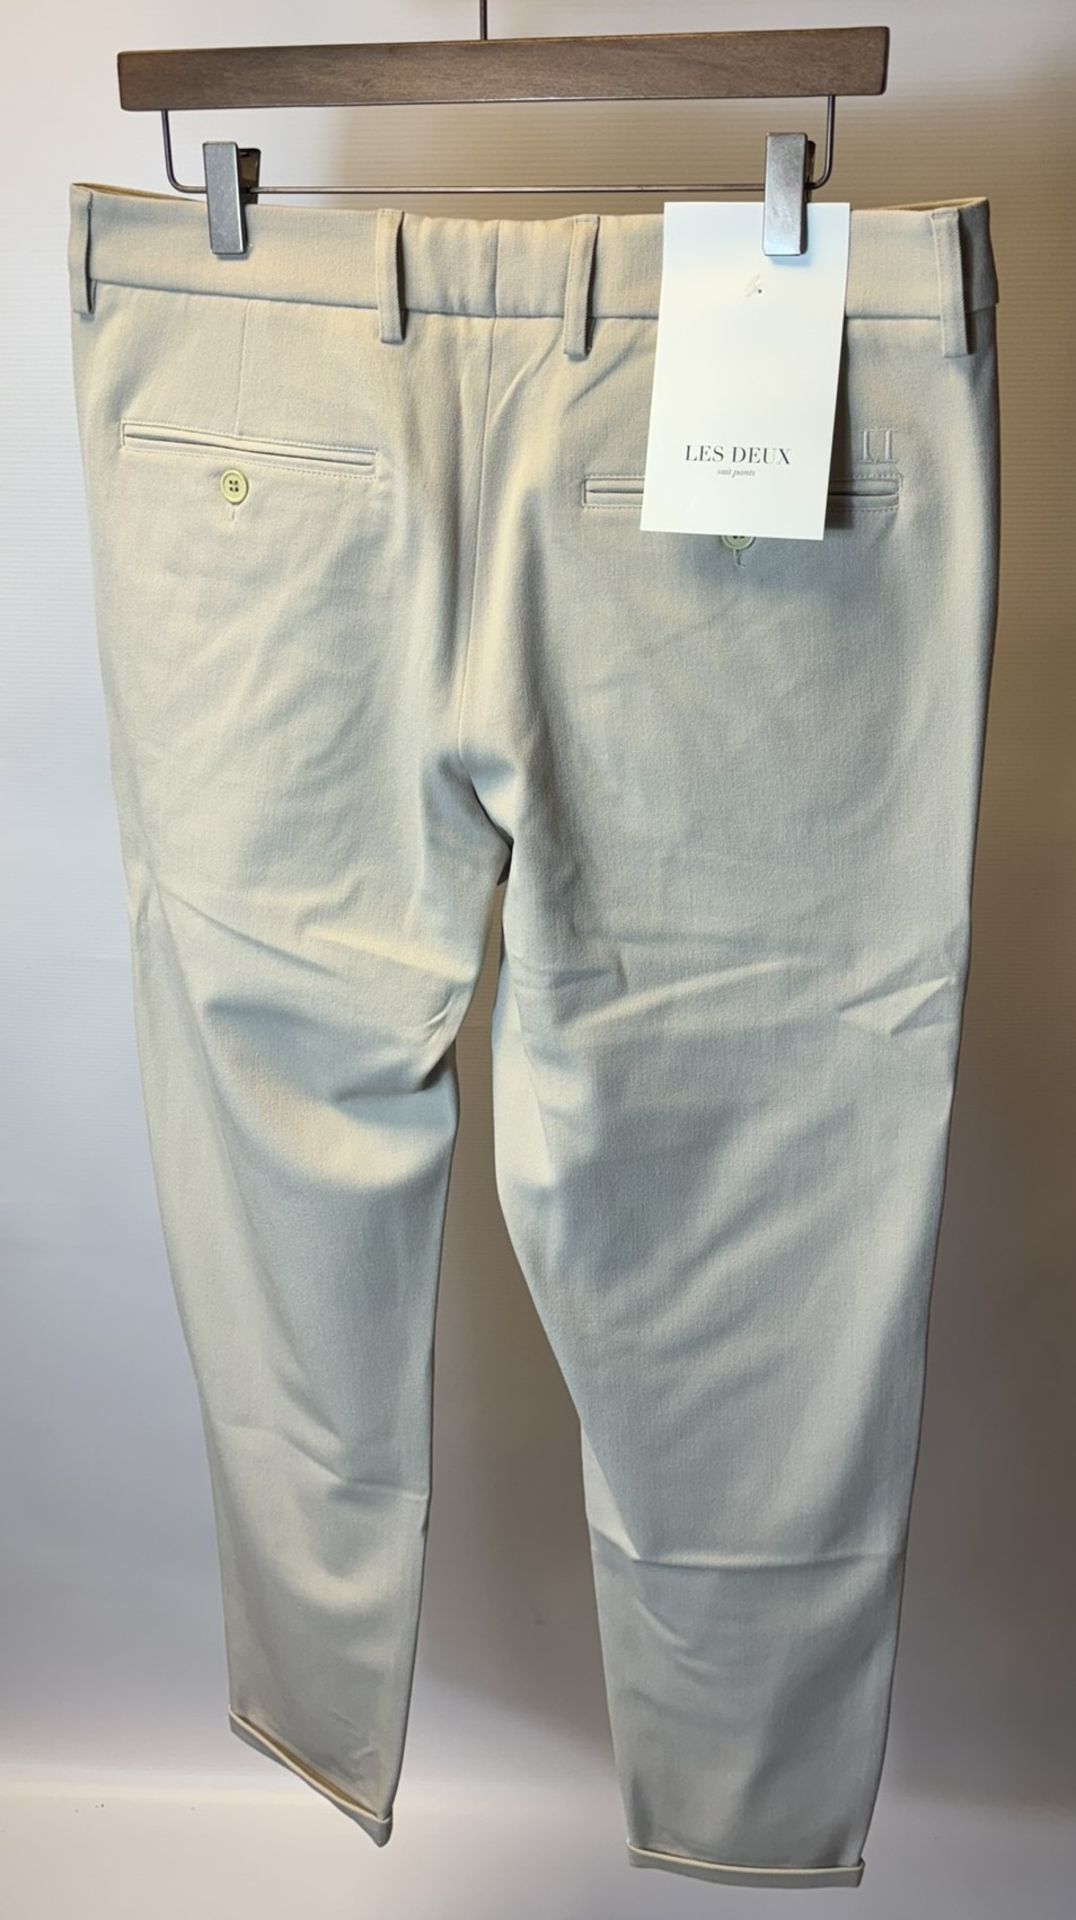 15 x Various Pairs Of Women's Trousers As Seen In Photos - Image 38 of 45